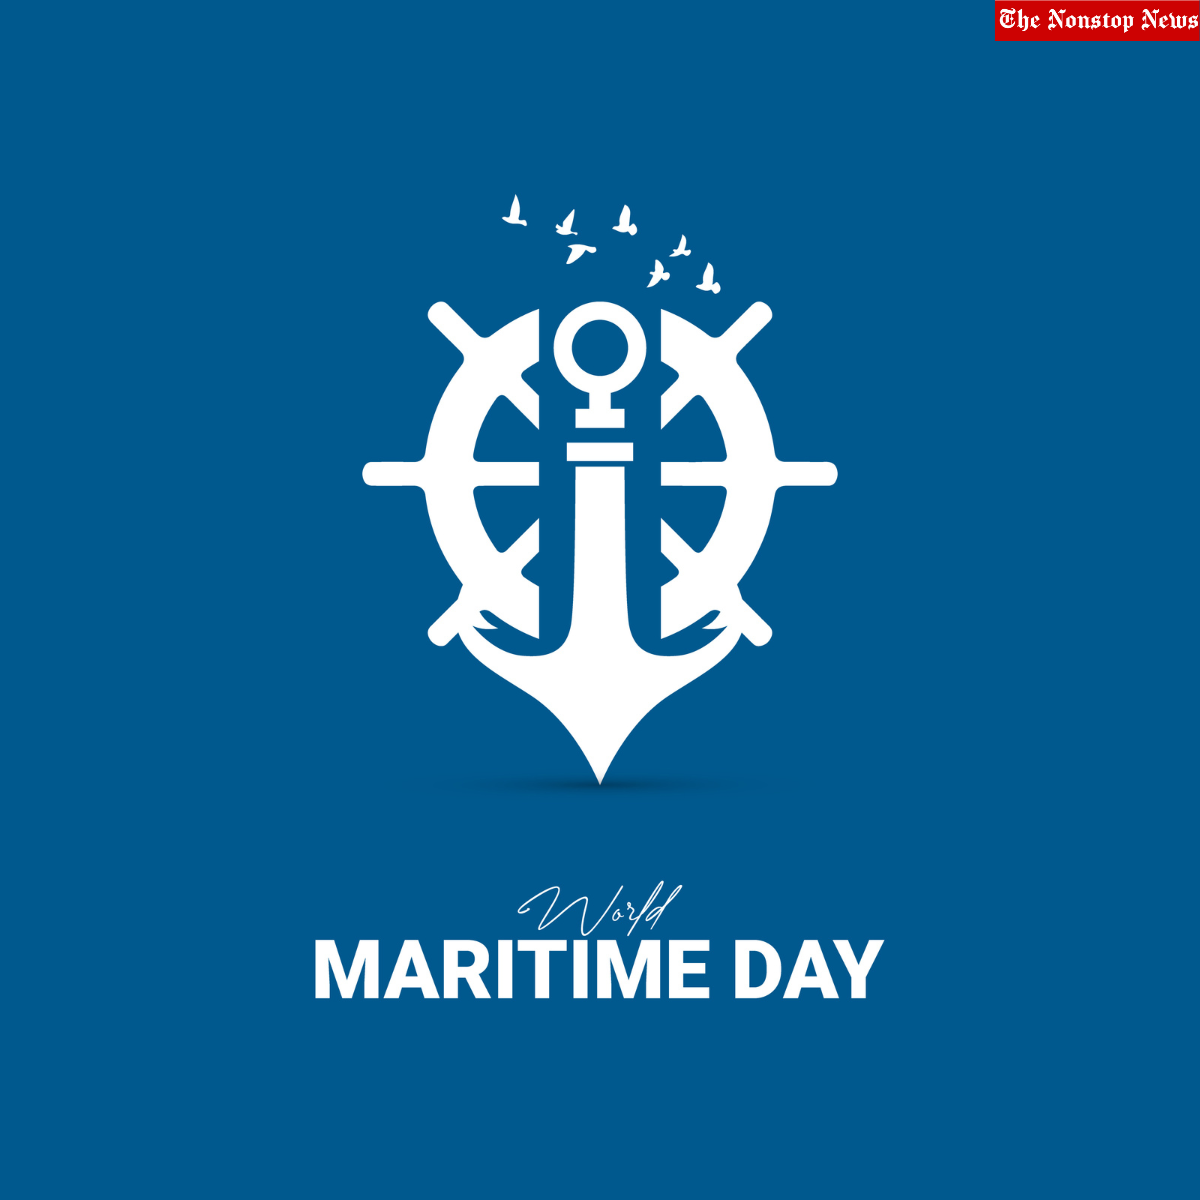 World Maritime Day 2022 Theme, Wishes, Quotes, Images, Slogans, Sayings, Messages and Greetings